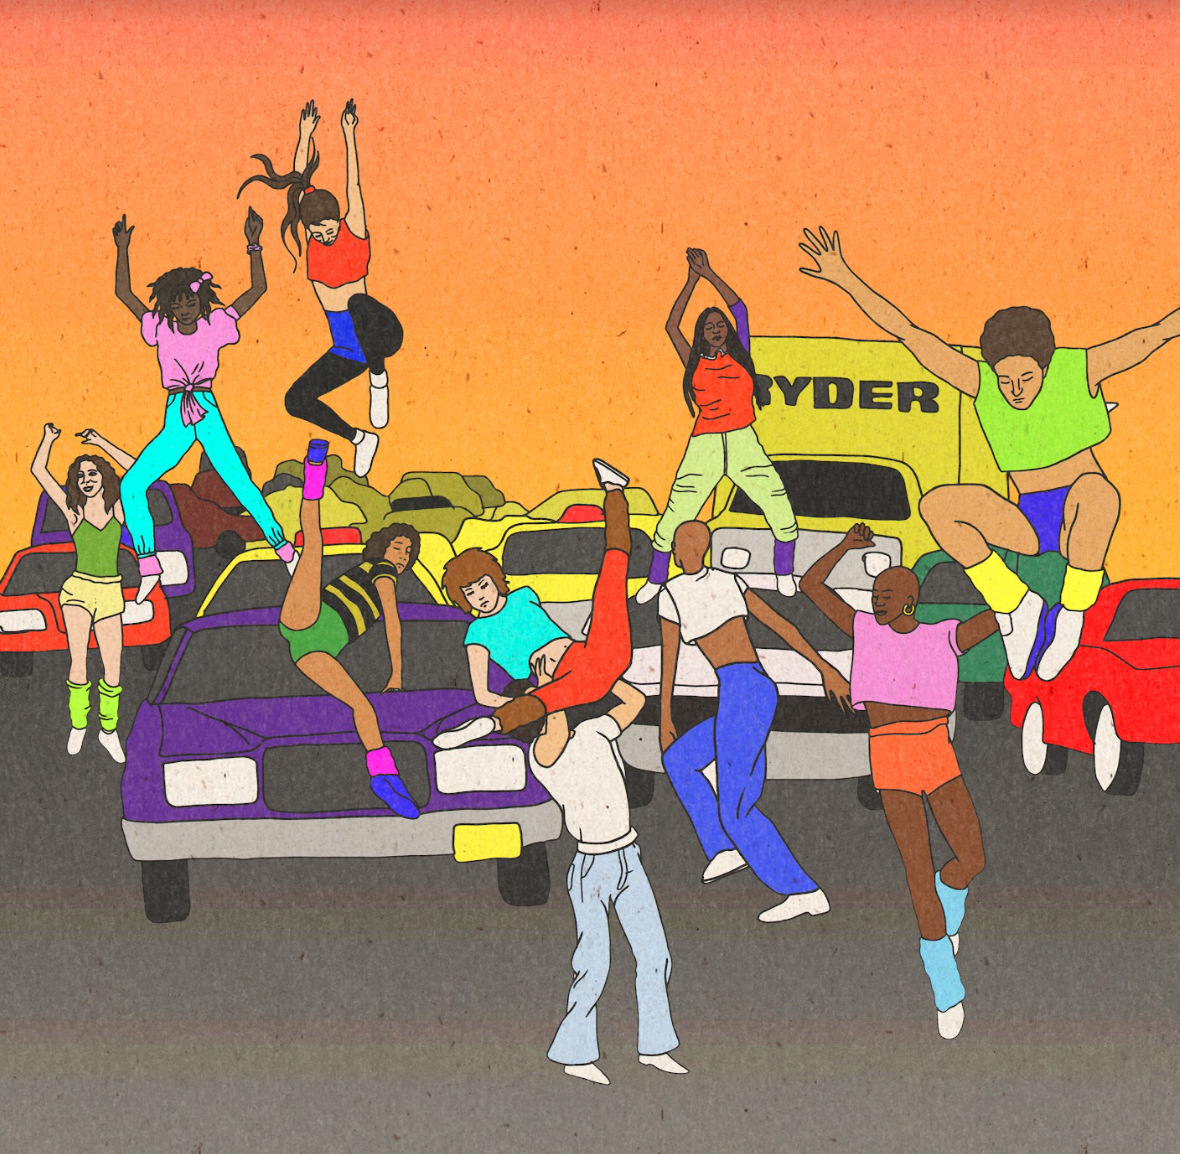 Illustration of a famous scene from the film Fame in which dancers go out into the streets and dance amongst the cars. This image points towards the idea of outdoor performances in unusual contexts.